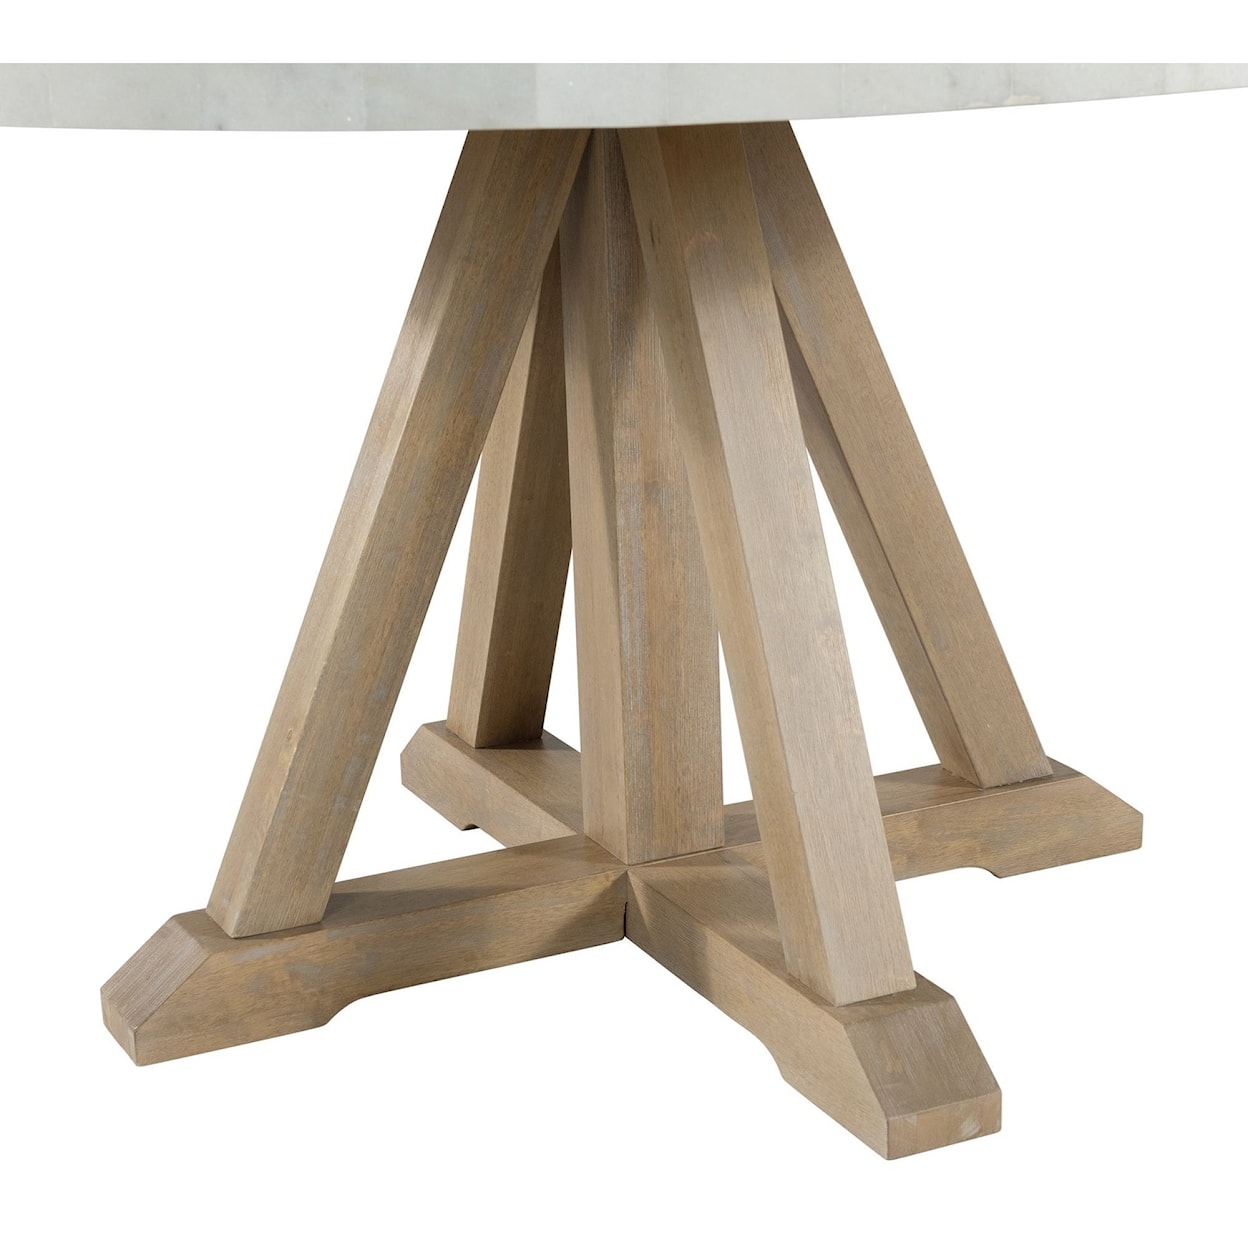 Elements Lakeview Round Dining Table